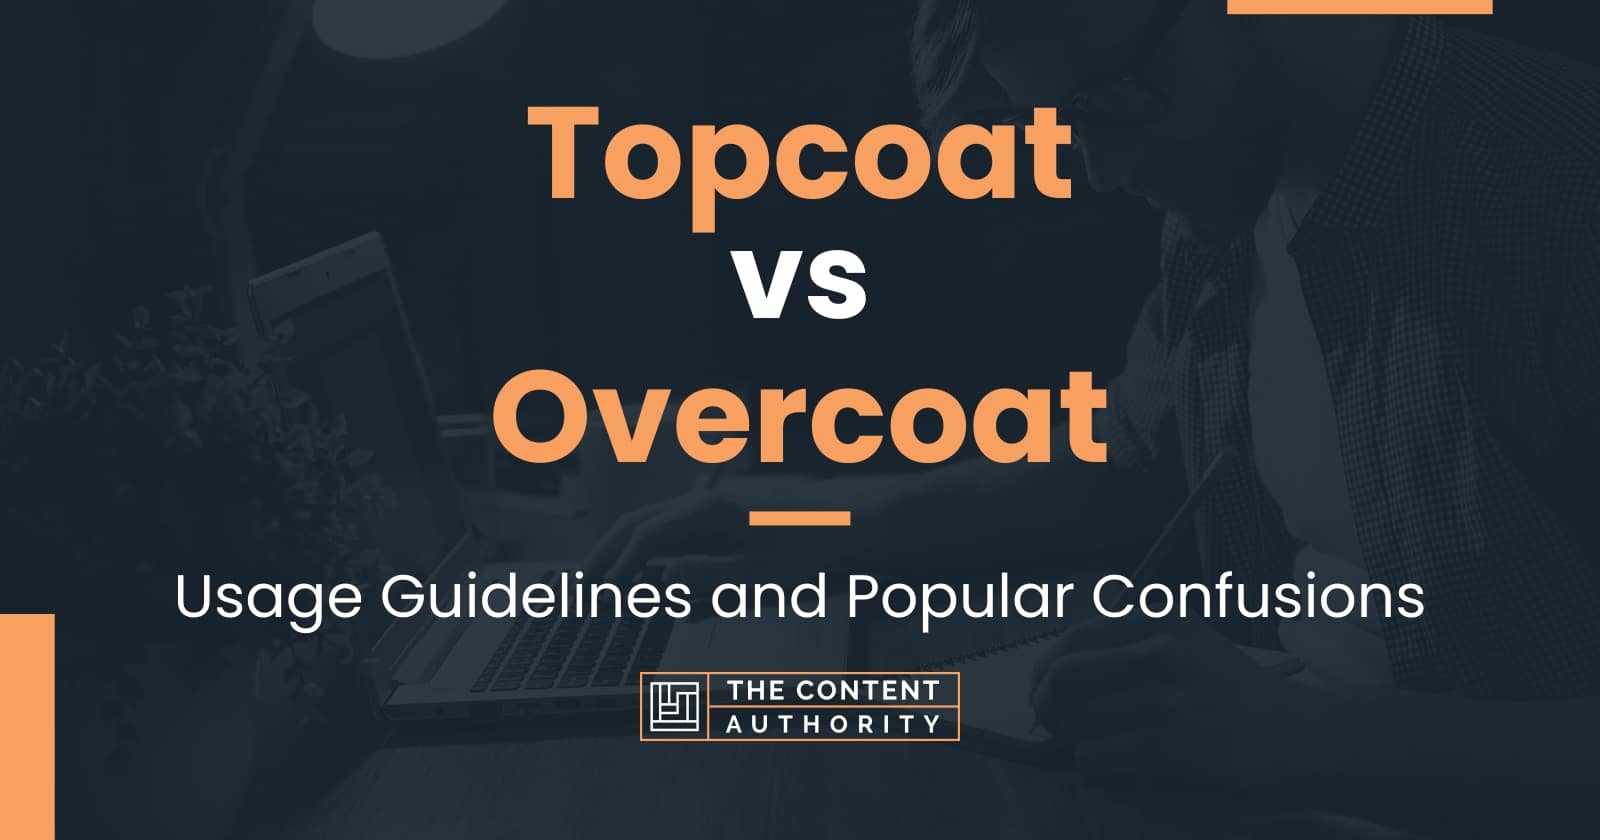 Topcoat vs Overcoat: Usage Guidelines and Popular Confusions